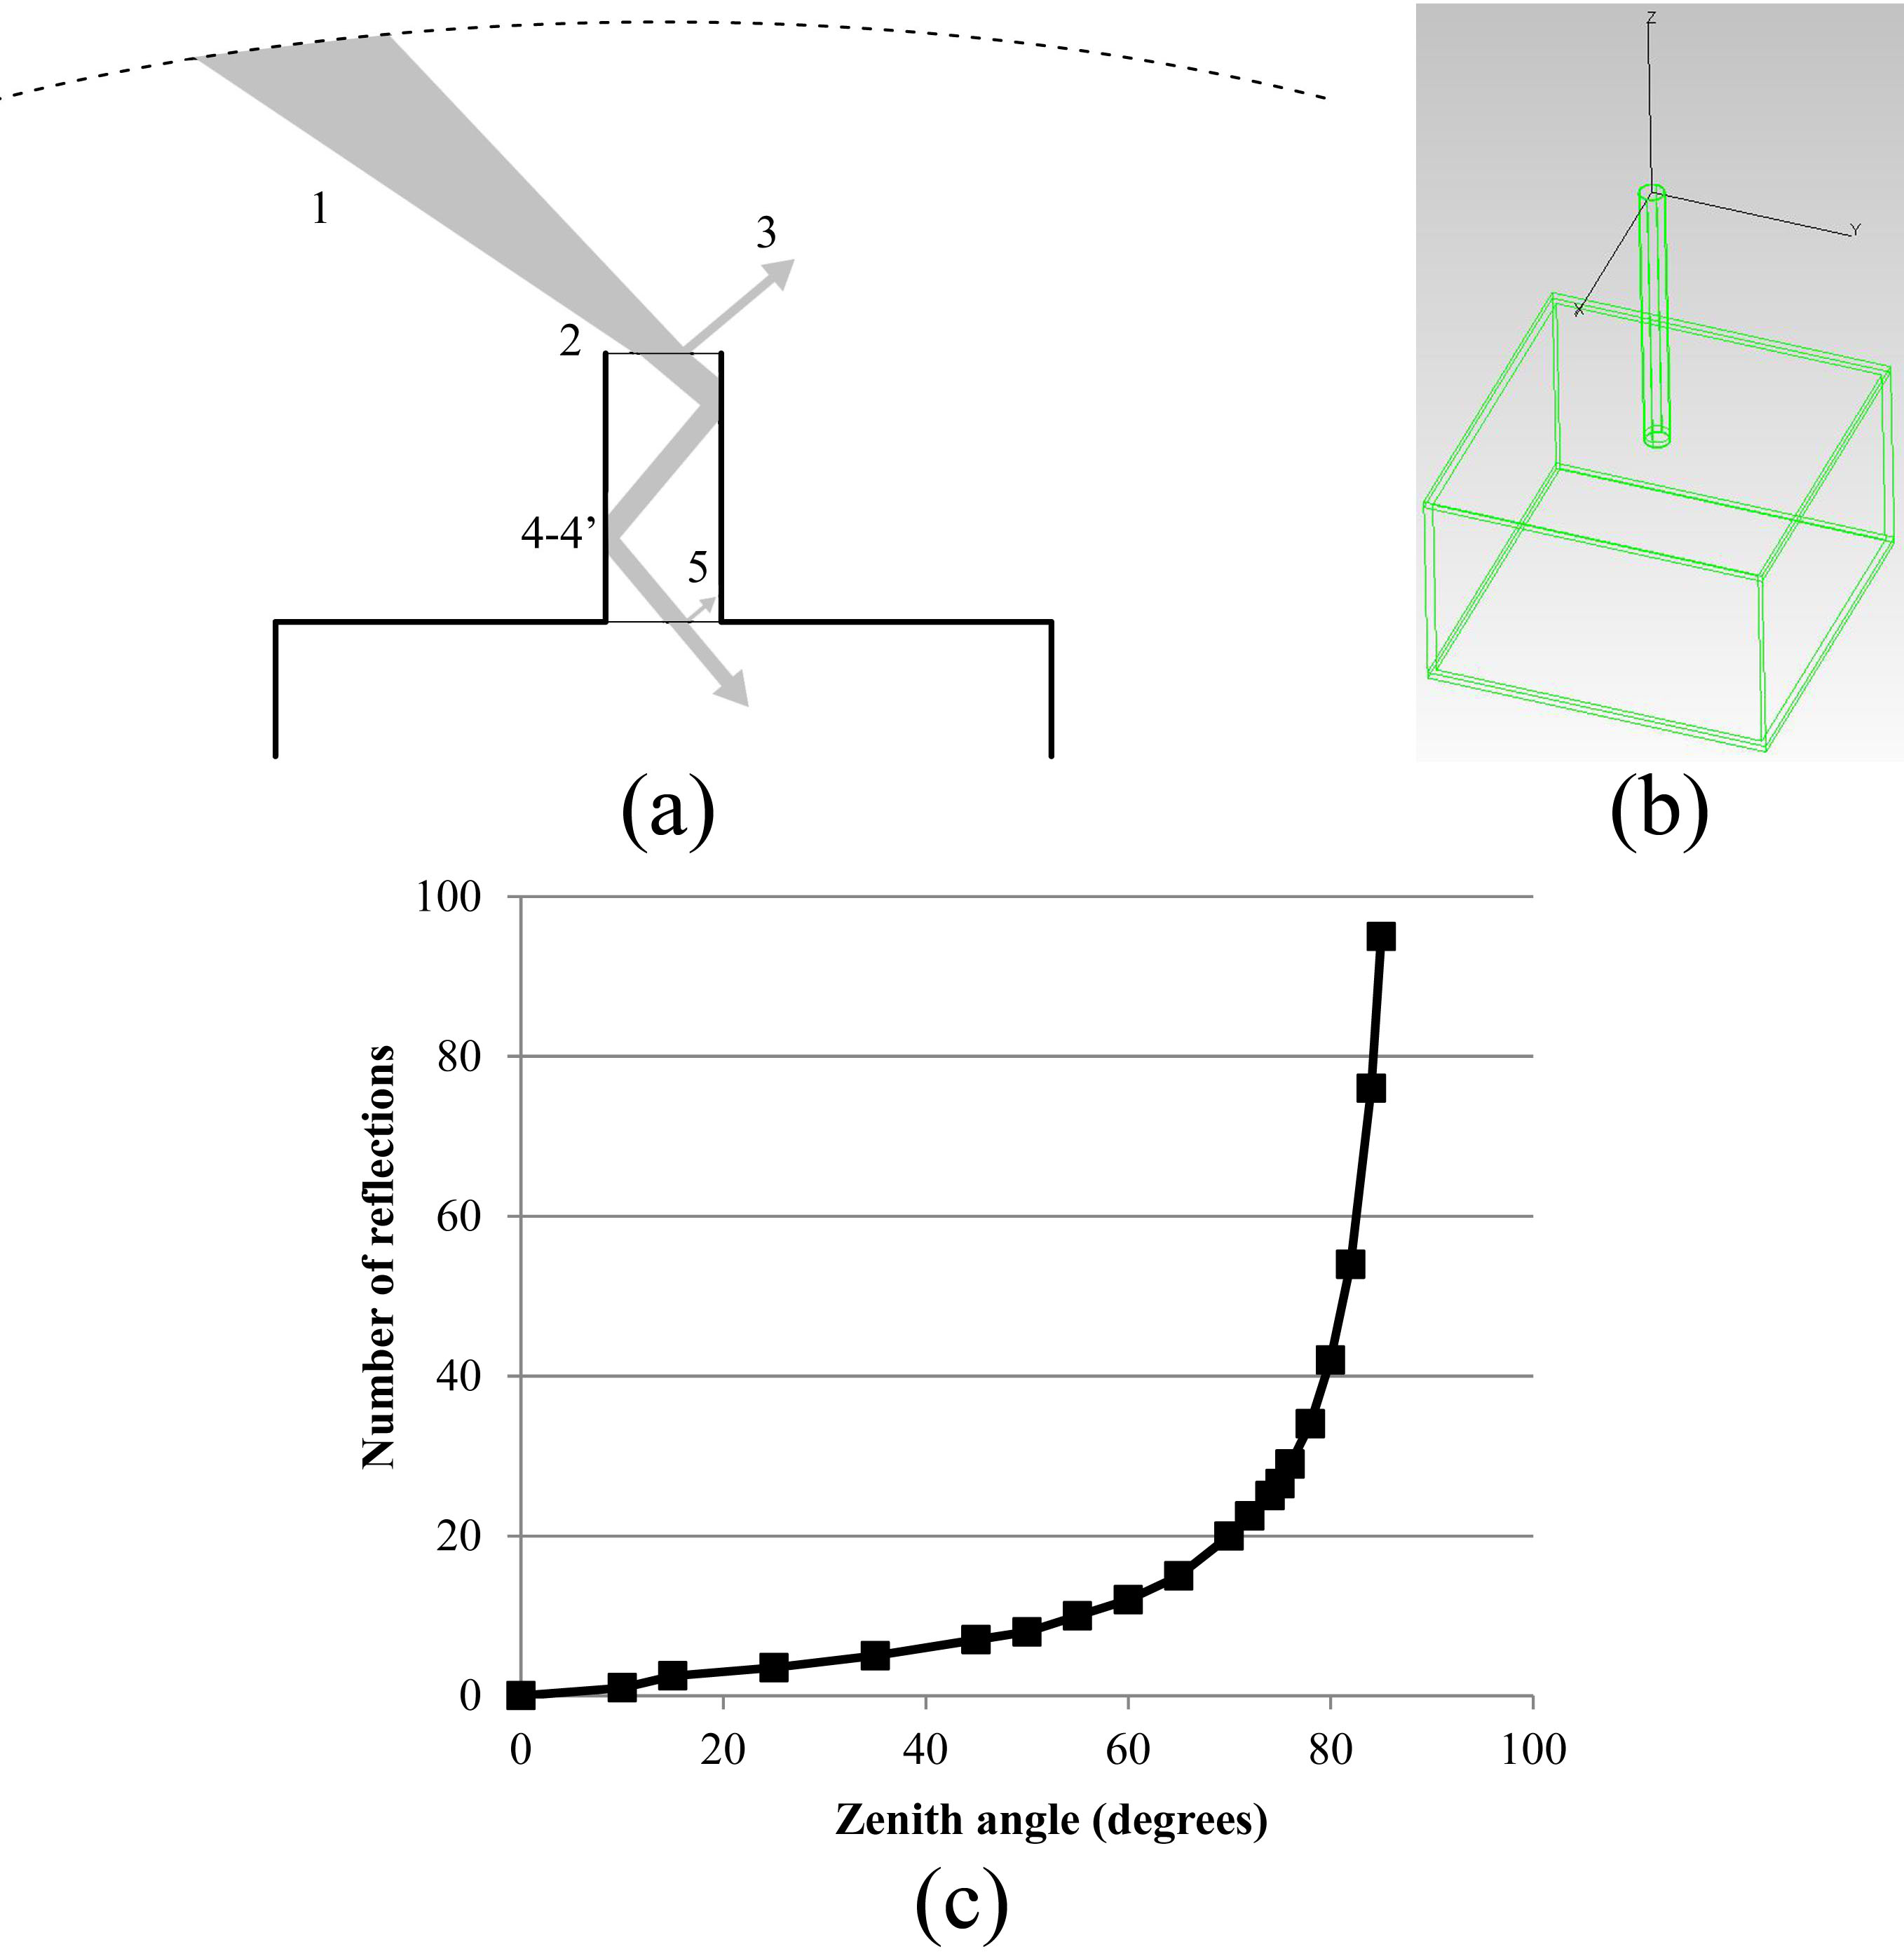 (a) Base case TracePro® model, (b) factors affecting the light output from the light pipe, and (c) dependence of the number of reflections in a pipe (aspect ratio 1/11.25) on the zenith angle. Zenith angle = 90 – solar altitude [17].